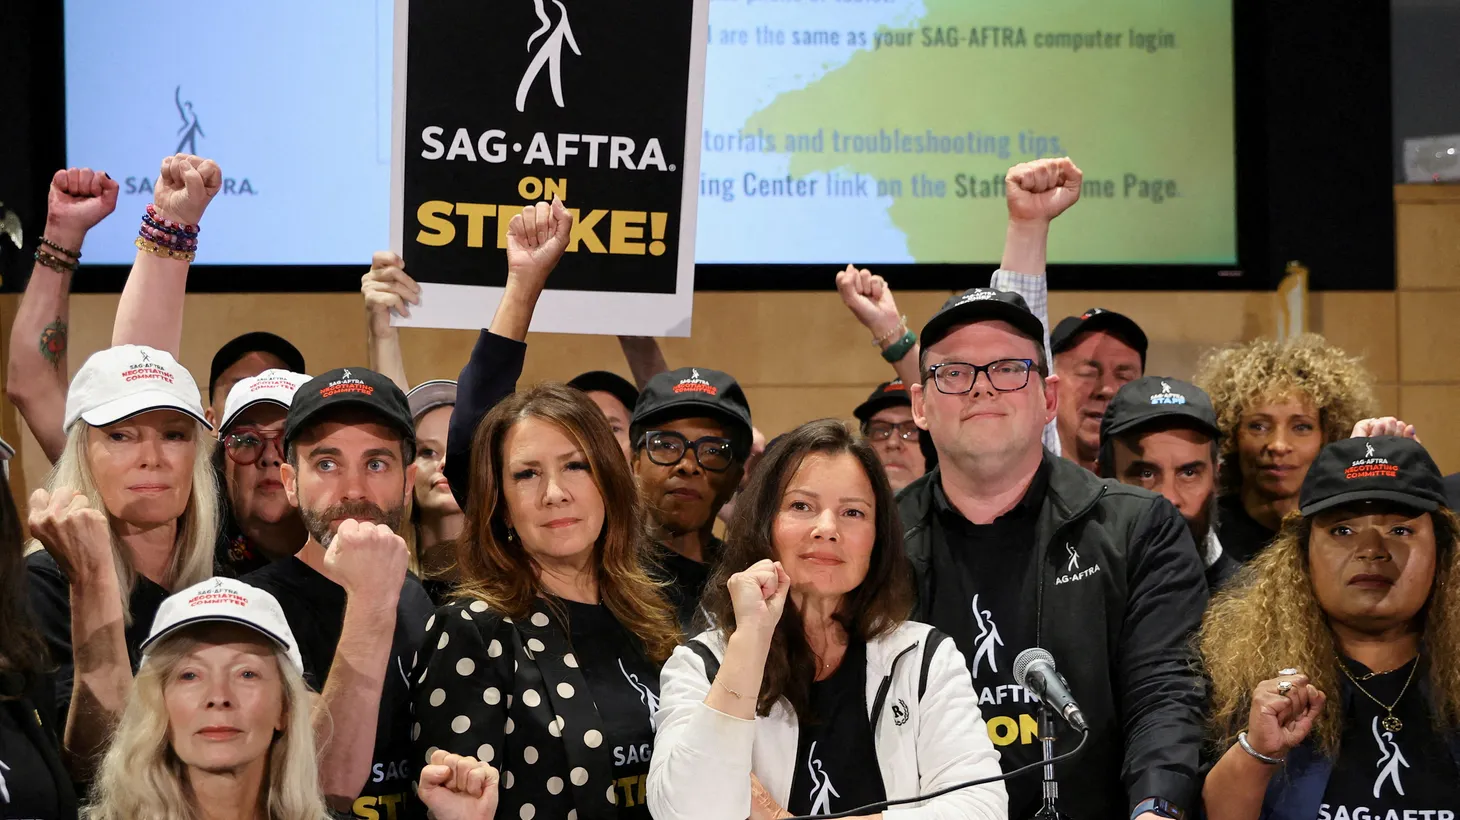 SAG-AFTRA union President Fran Drescher, Duncan Crabtree-Ireland, SAG-AFTRA National Executive Director and Chief Negotiator, and union members gesture at SAG-AFTRA offices after negotiations ended with the Alliance of Motion Picture and Television Producers (AMPTP) in Los Angeles, on July 13, 2023.